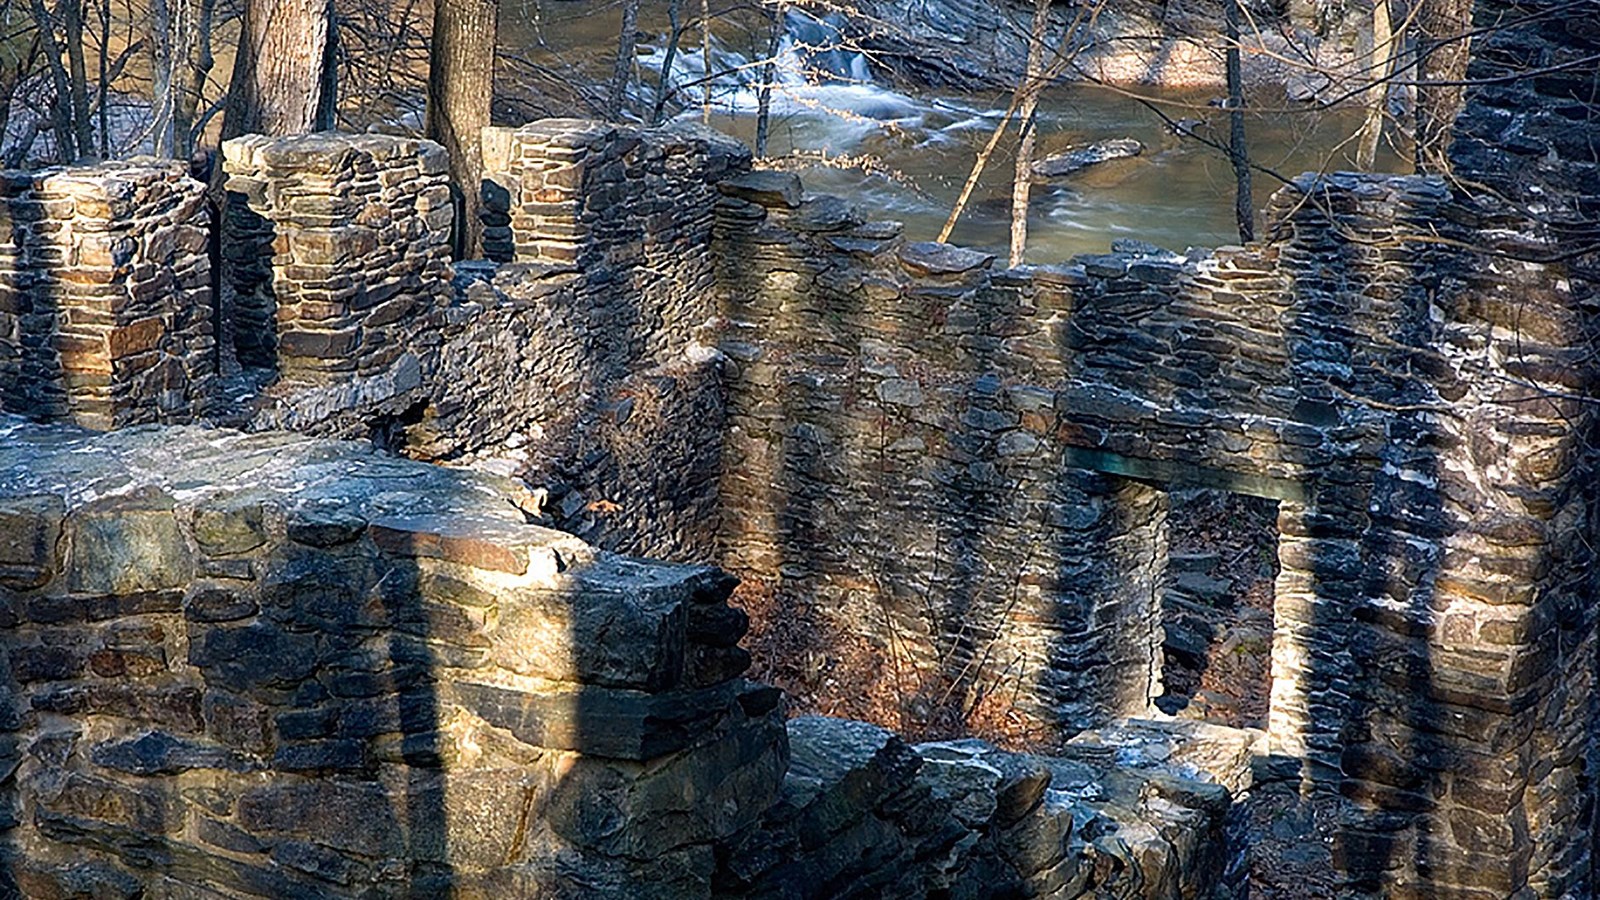 Photograph of stone walls of ruins with Sope Creek and the woods in the background.